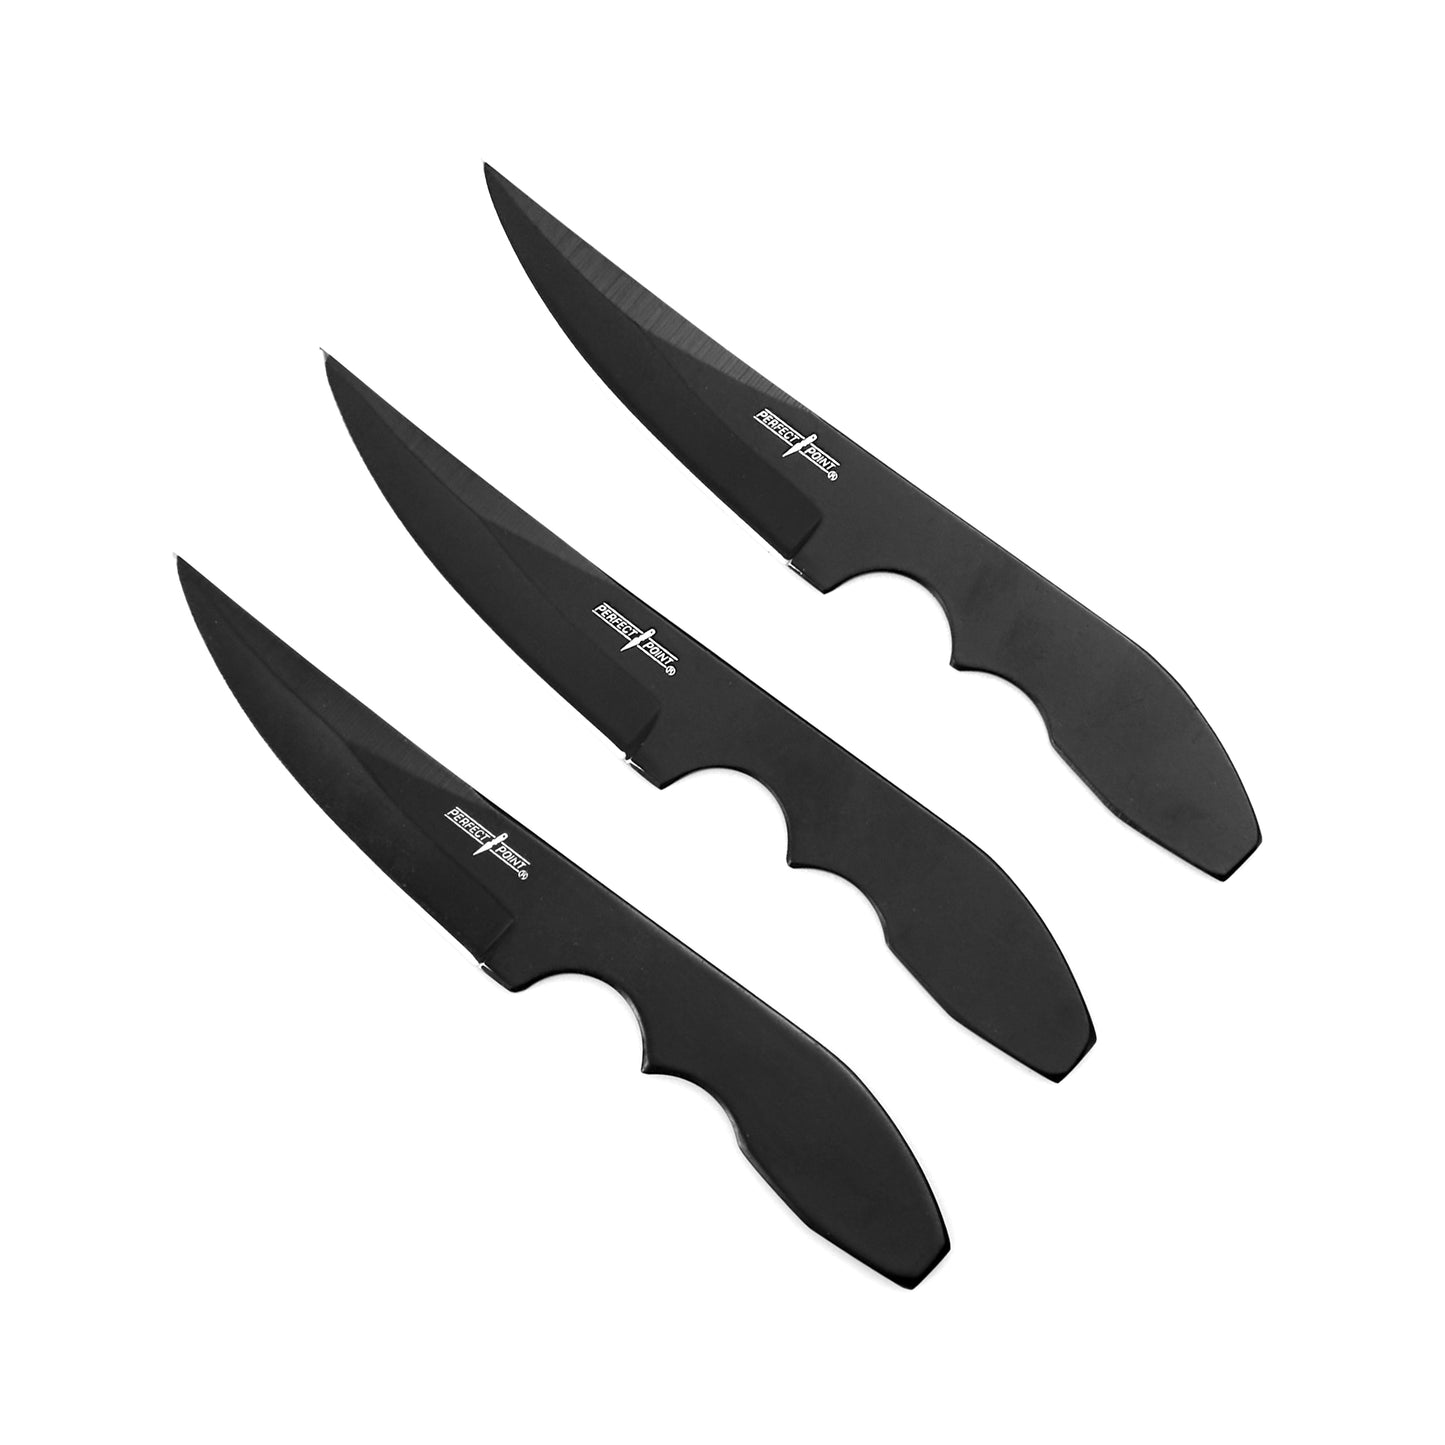 3 Piece 6 Inch Stainless Throwing Knife Set Includes Nylon Sheath